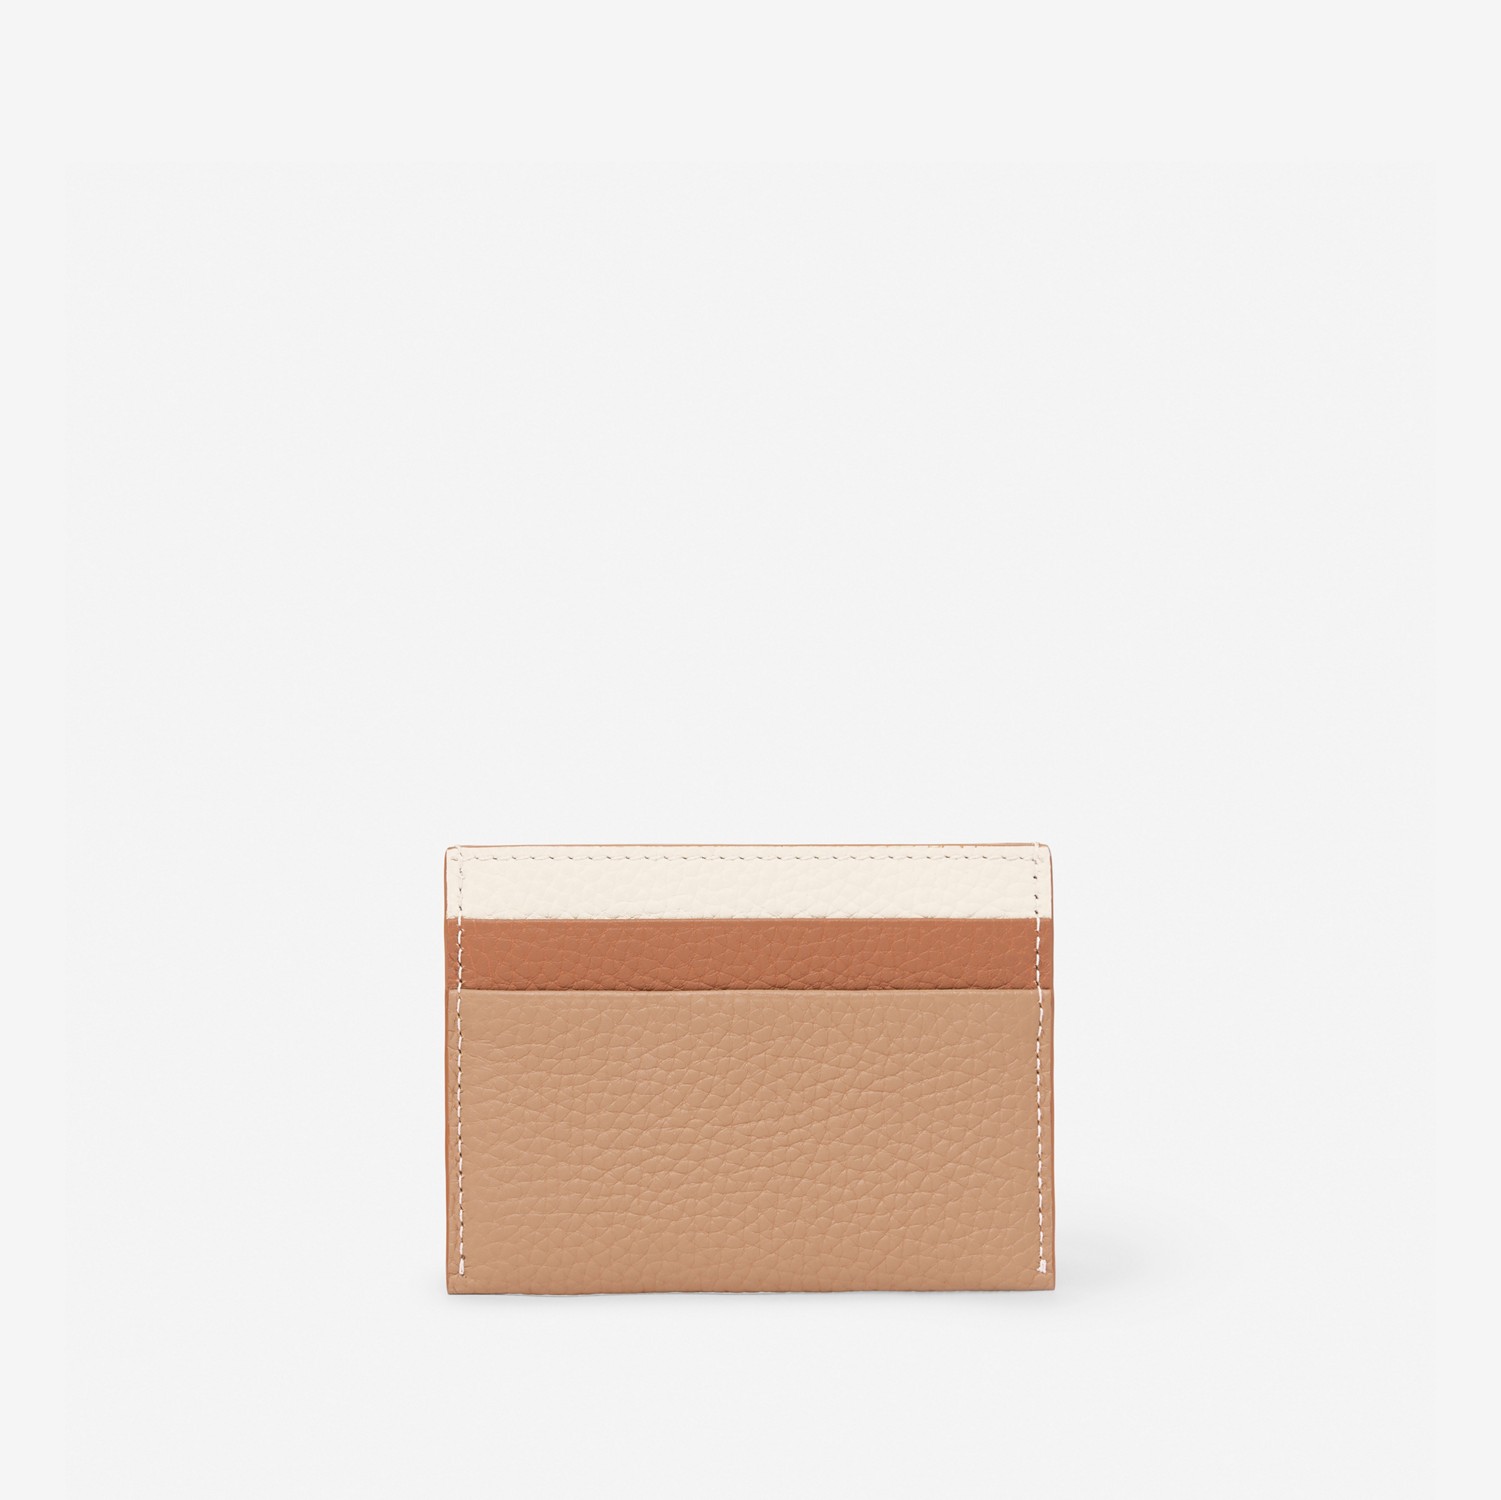 Tri-tone Grainy Leather TB Card Case in Camel/archive Beige/warm Tan - Women | Burberry® Official